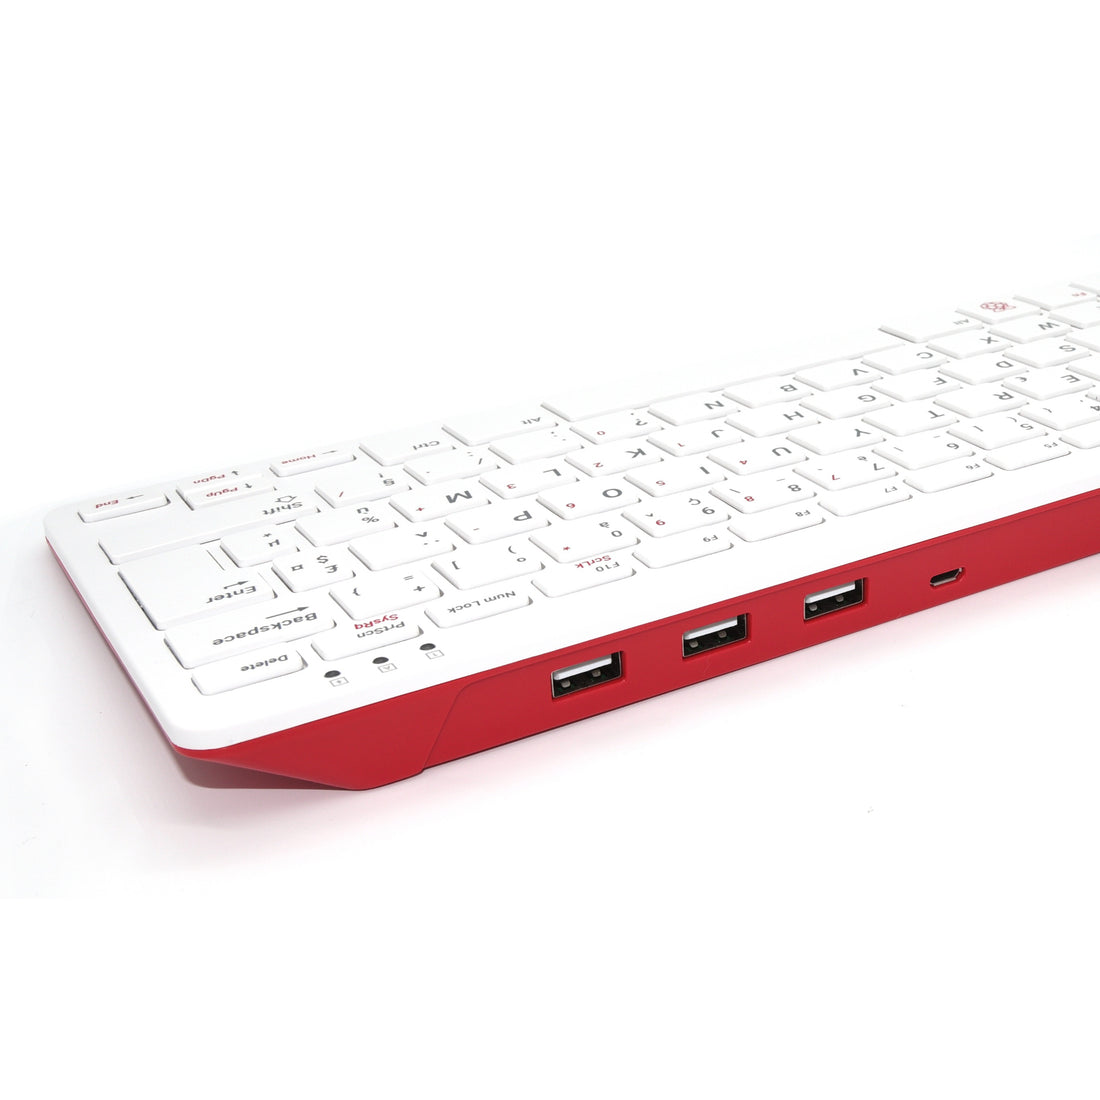 Raspberry Pi Official Keyboard and Mouse Value Pack (U.S. Version Red/White) by PepperTech Digital